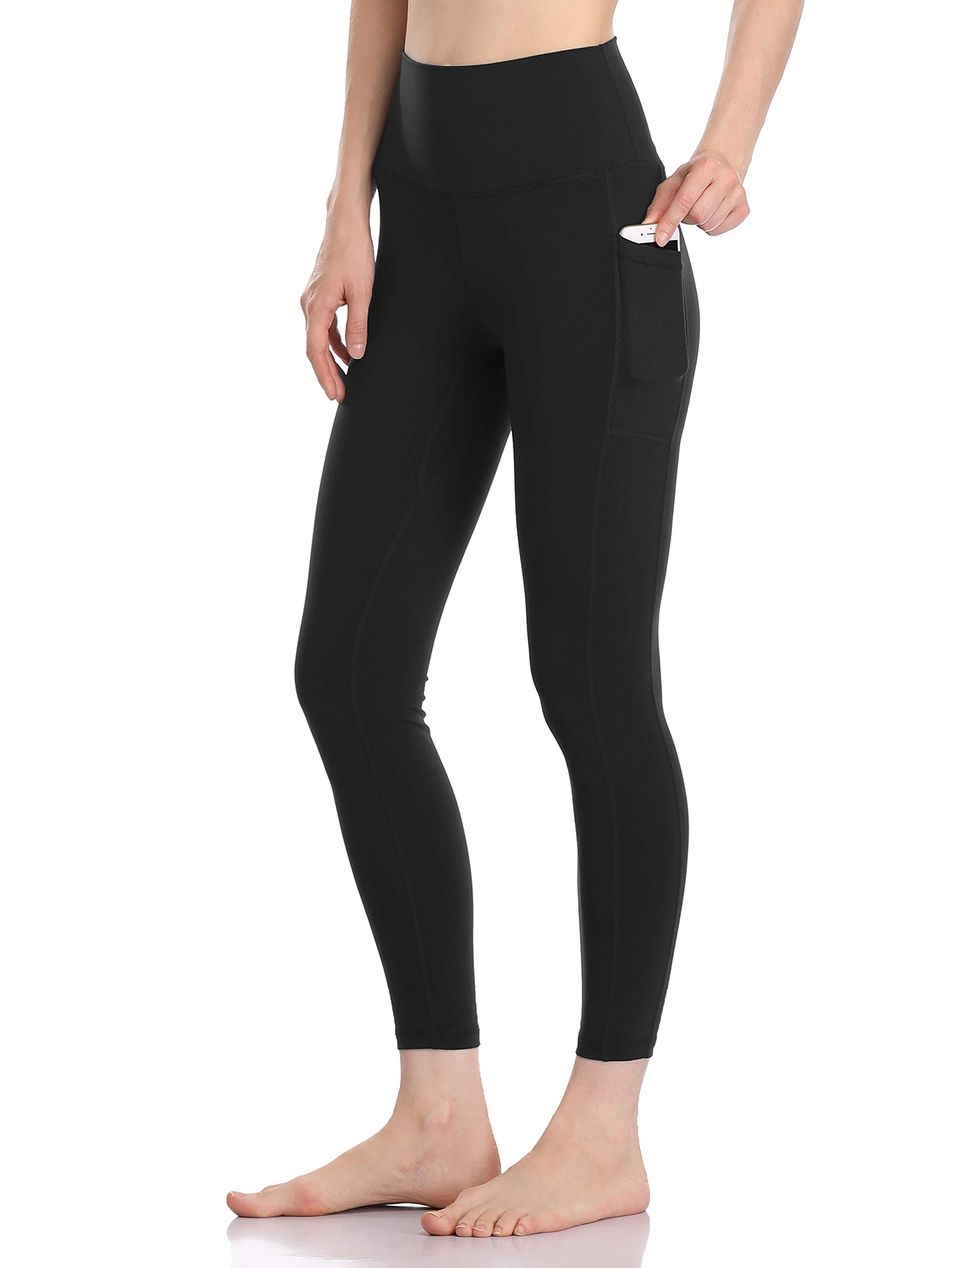 High Waist Tummy Control Sports Leggings With Side Pocket & Ankle